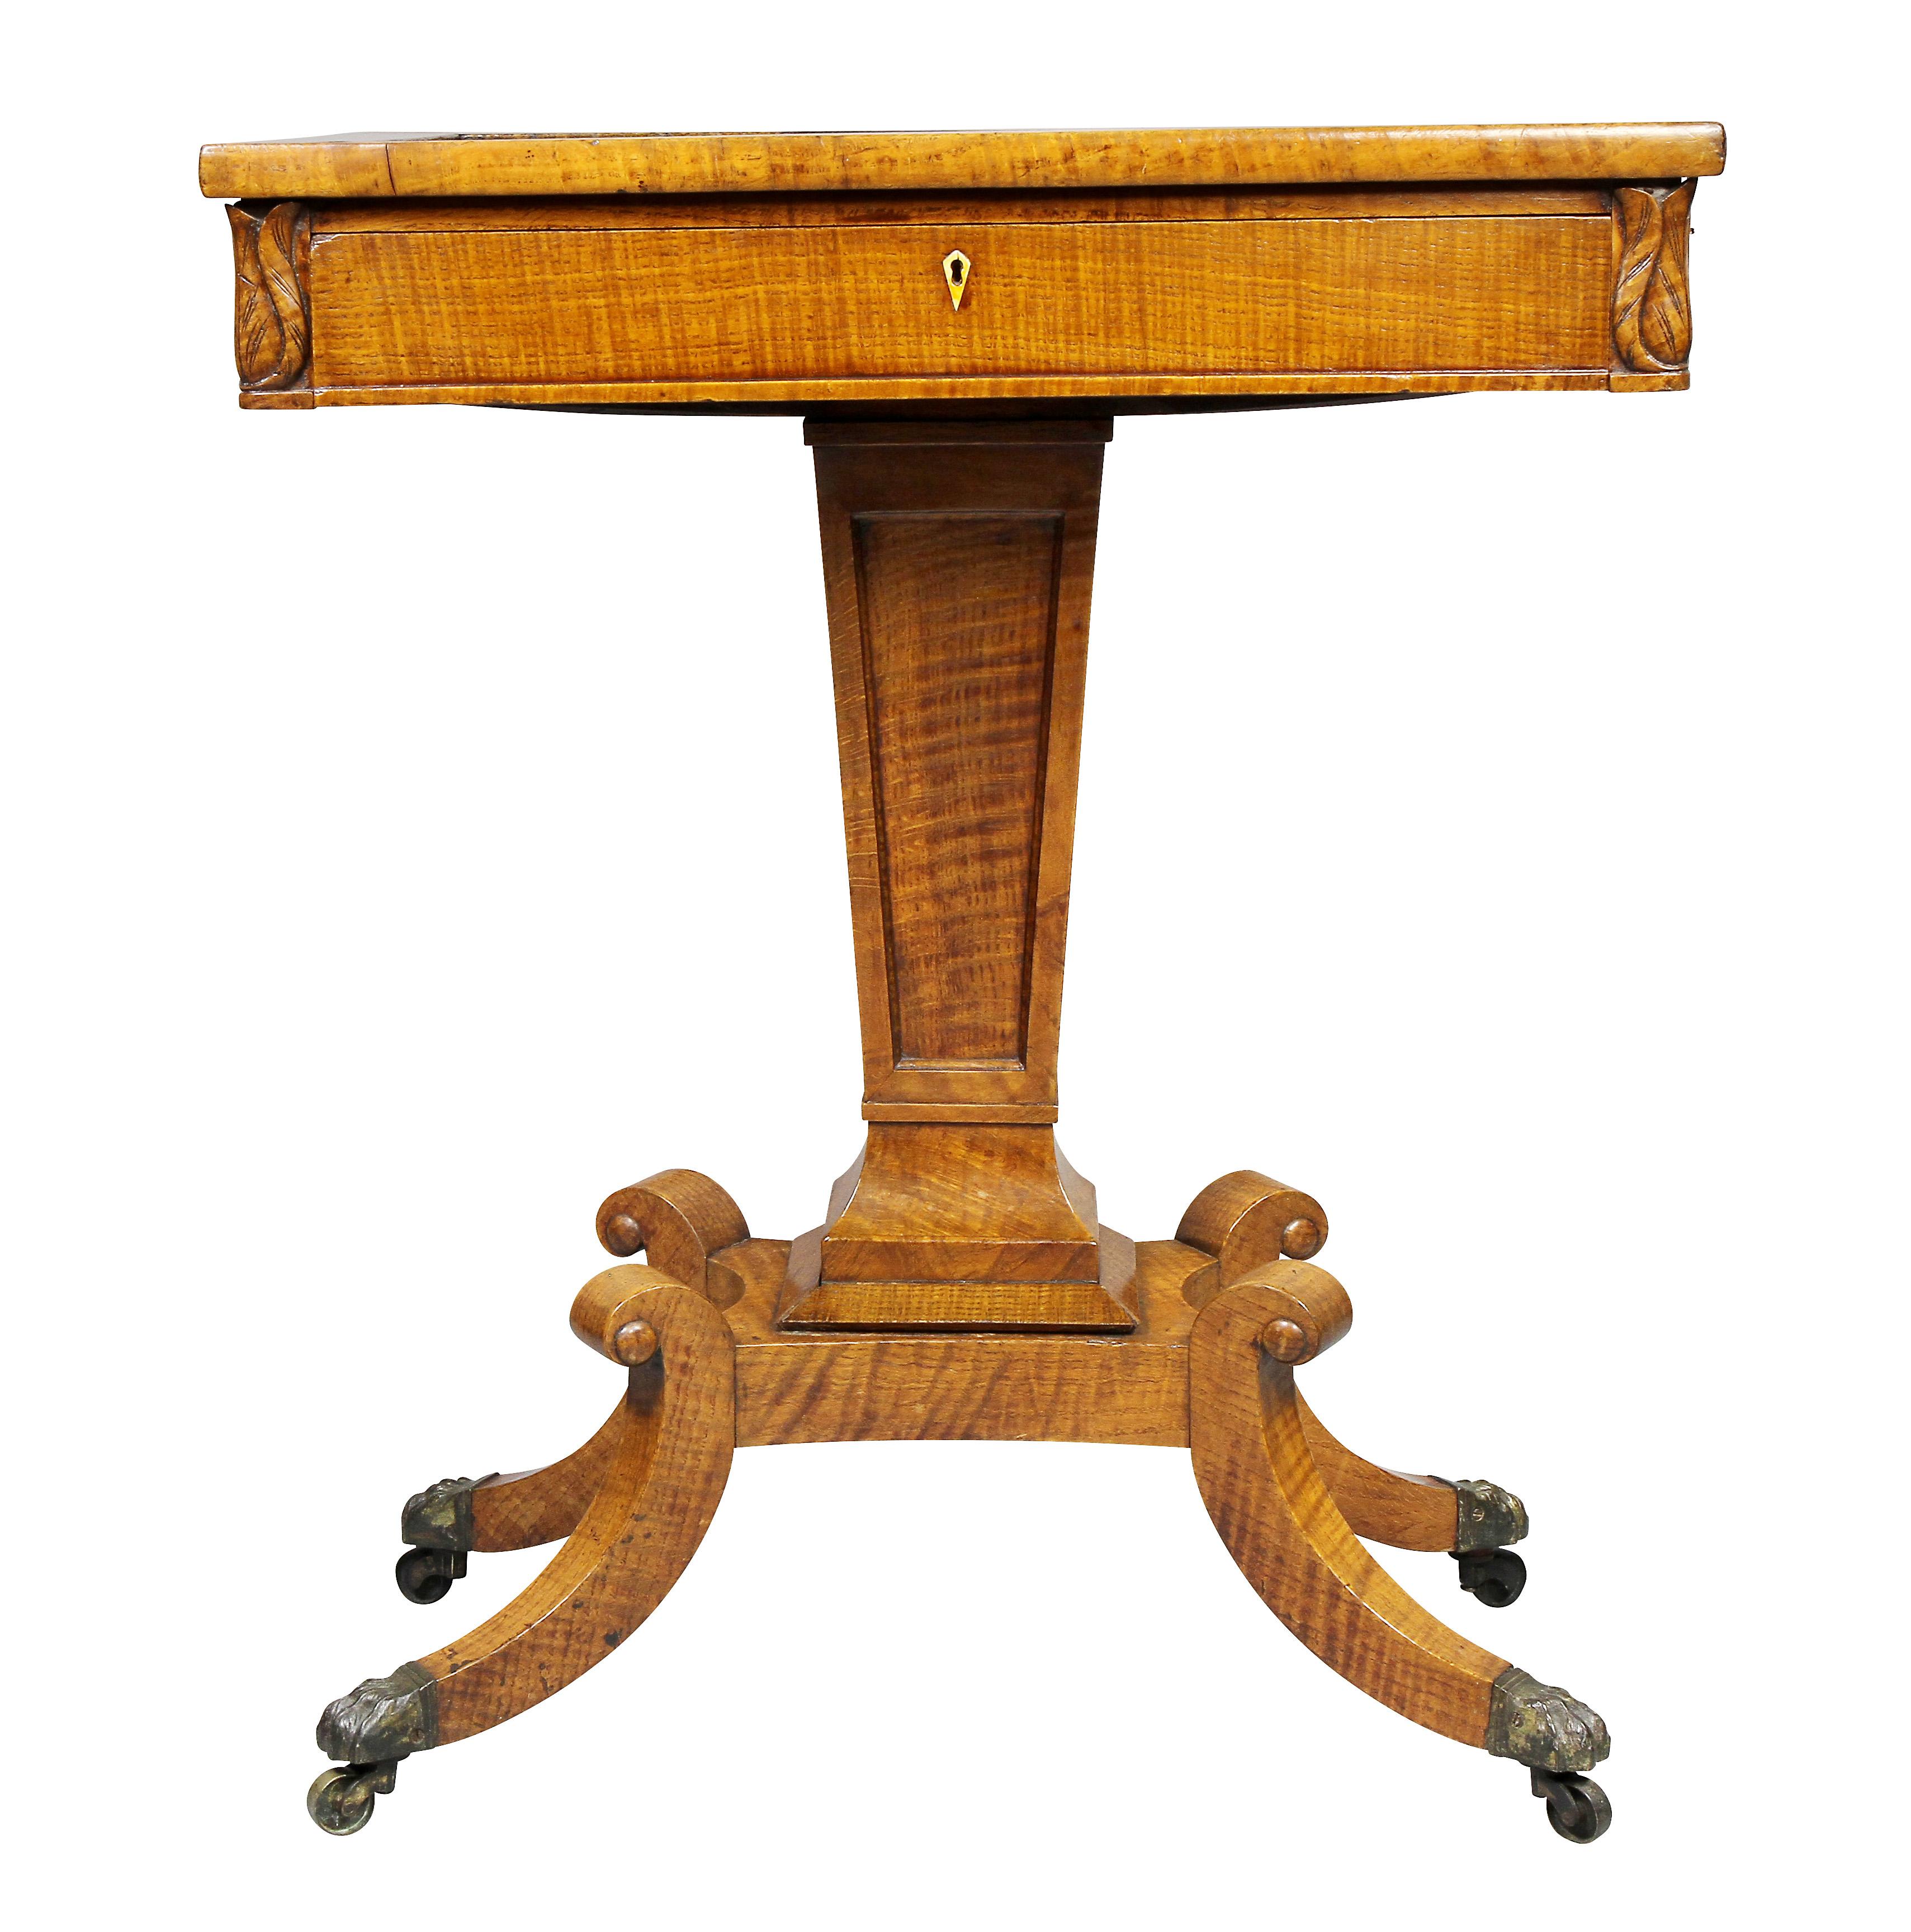 Rectangular inset marble with various types within a raised banded edge, over a drawer and tapered support, and four saber legs with casters.